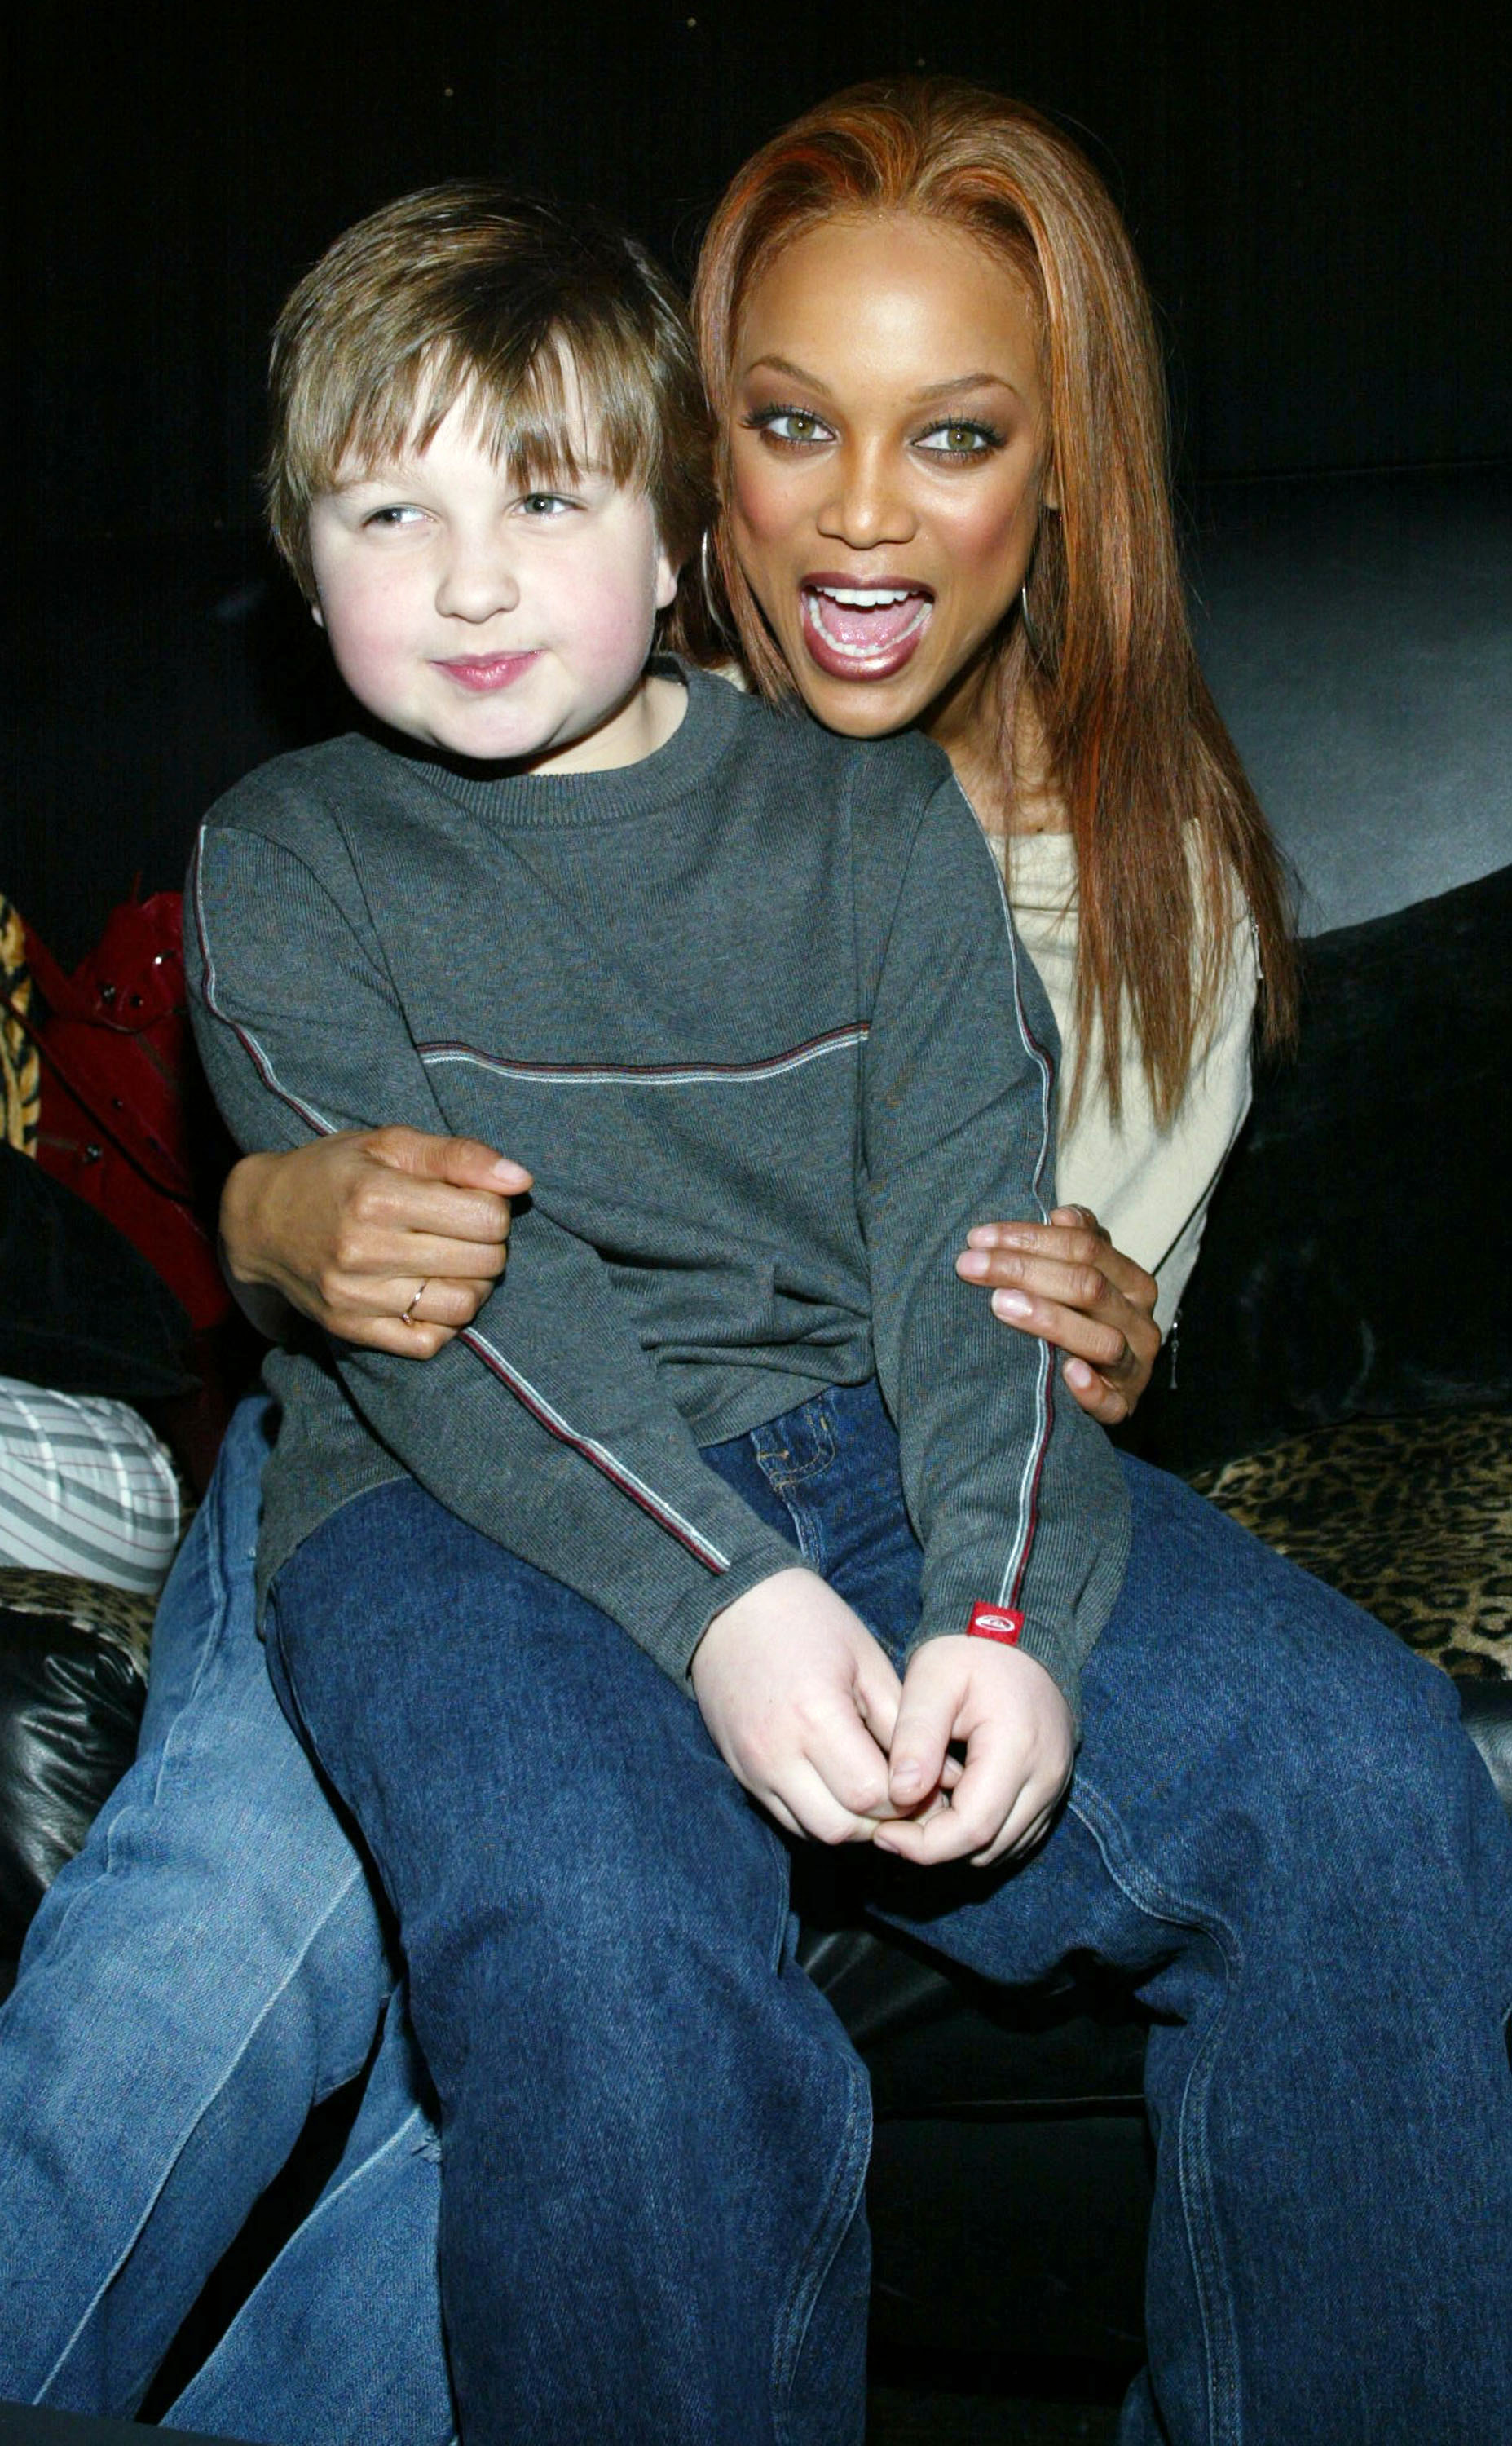 Angus T. Jones and model Tyra Banks in Hollywood in 2004 | Source: Getty Images